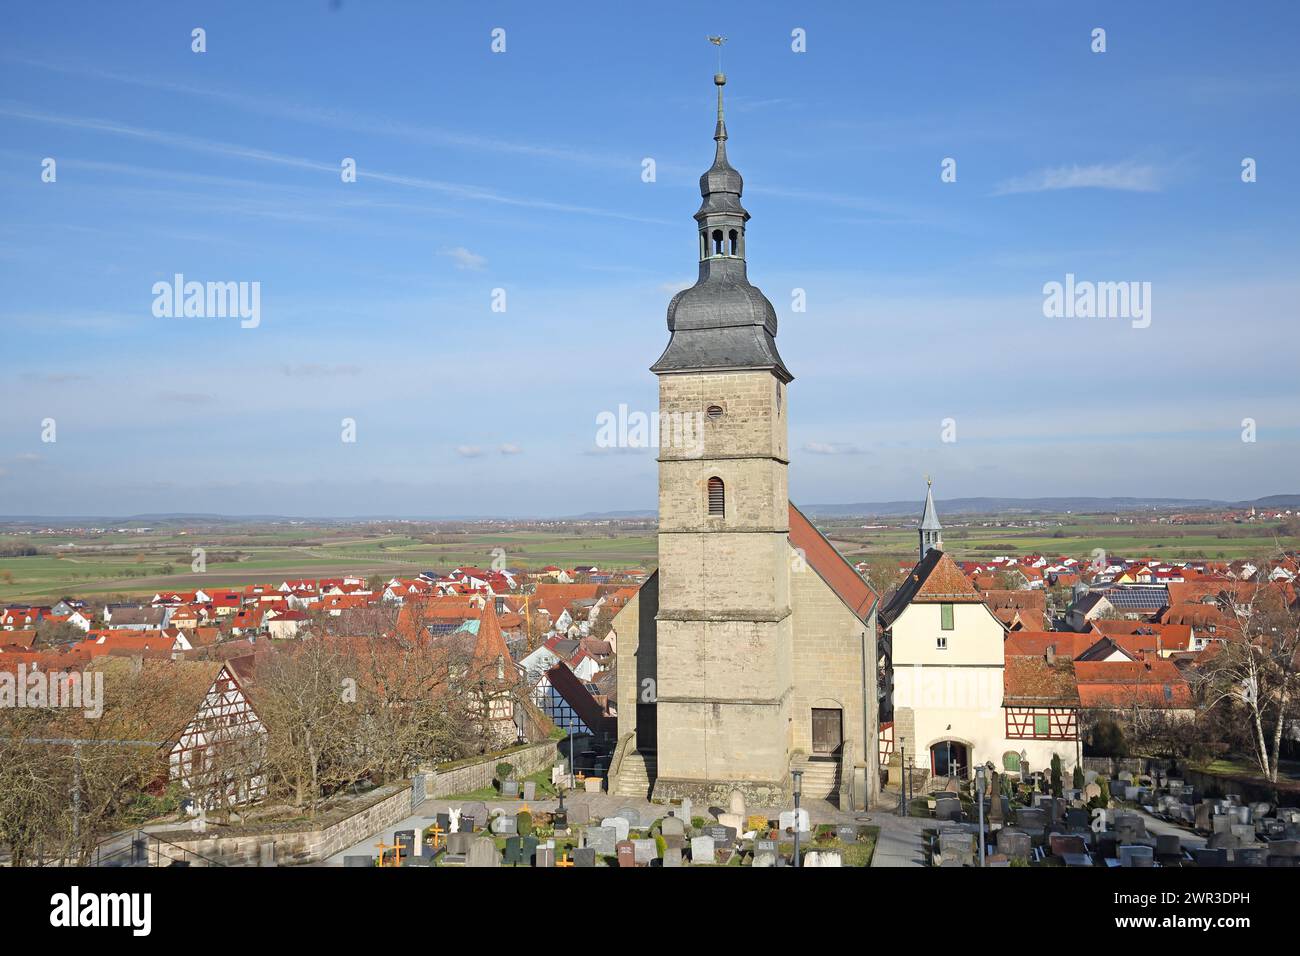 St John's Church with cemetery and historic gate tower, view, panoramic view, townscape, Burgbernheim, Middle Franconia, Franconia, Bavaria, Germany Stock Photo